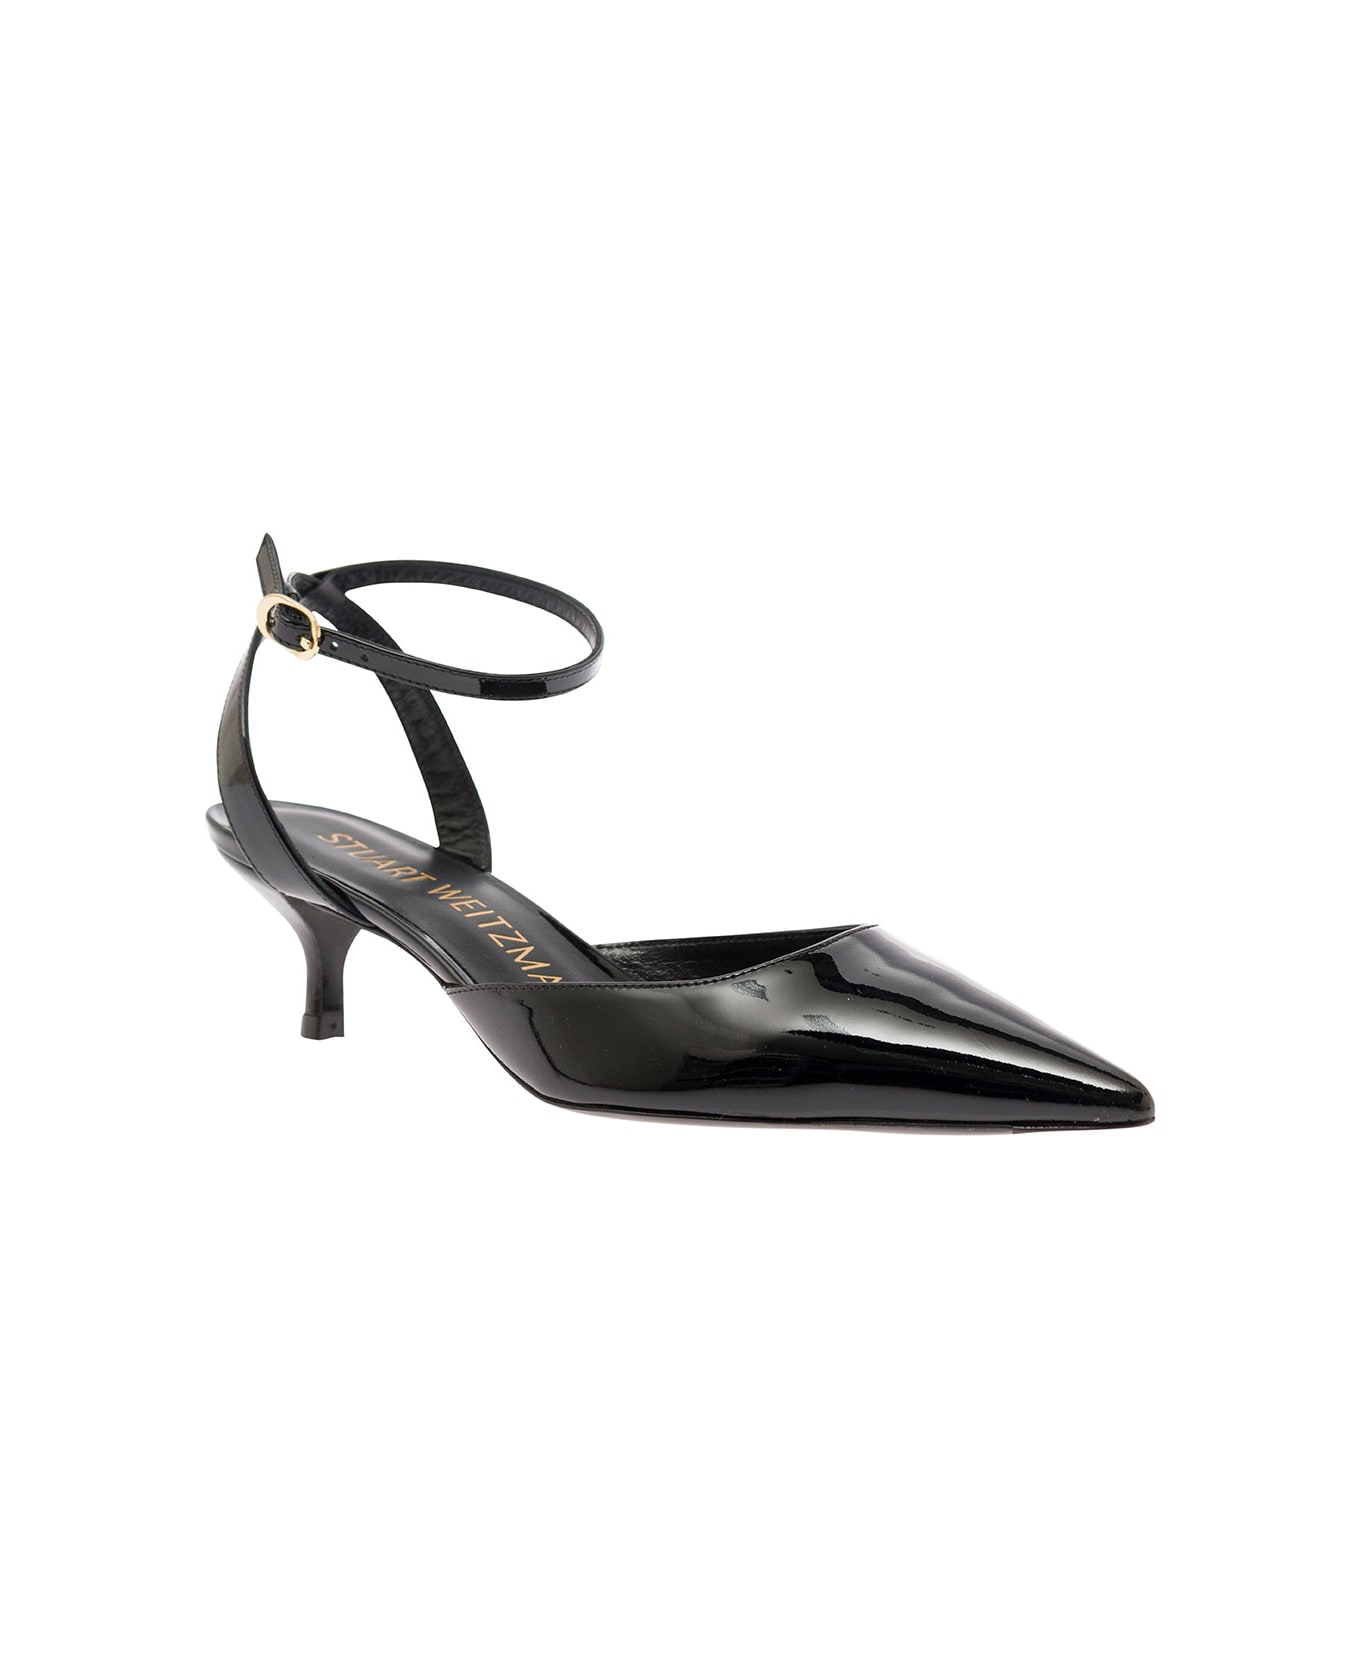 Stuart Weitzman 'barelythere' Black Pumps With Ankle Strap In Patent Leather Woman - Black ハイヒール